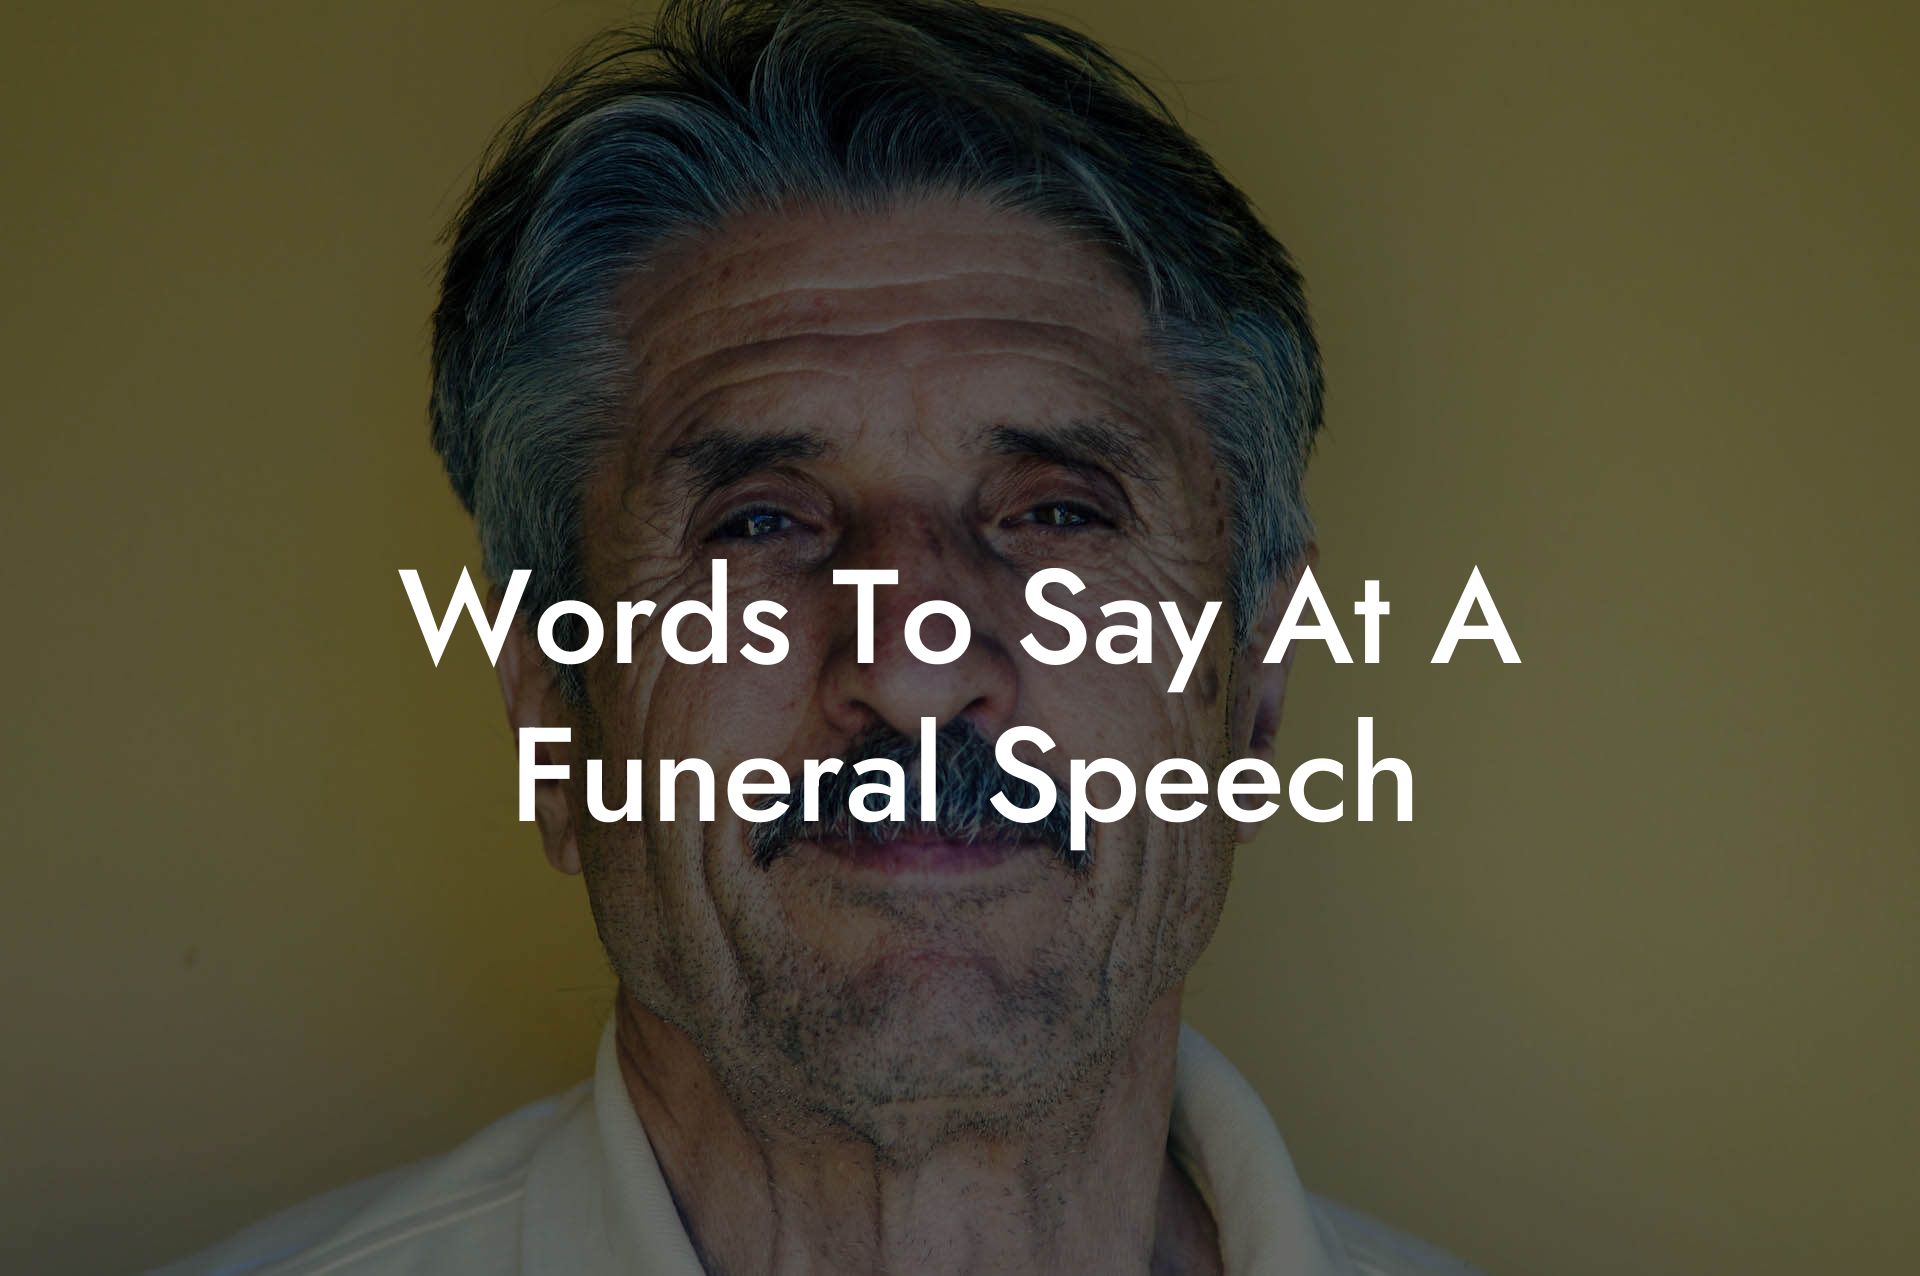 Words To Say At A Funeral Speech